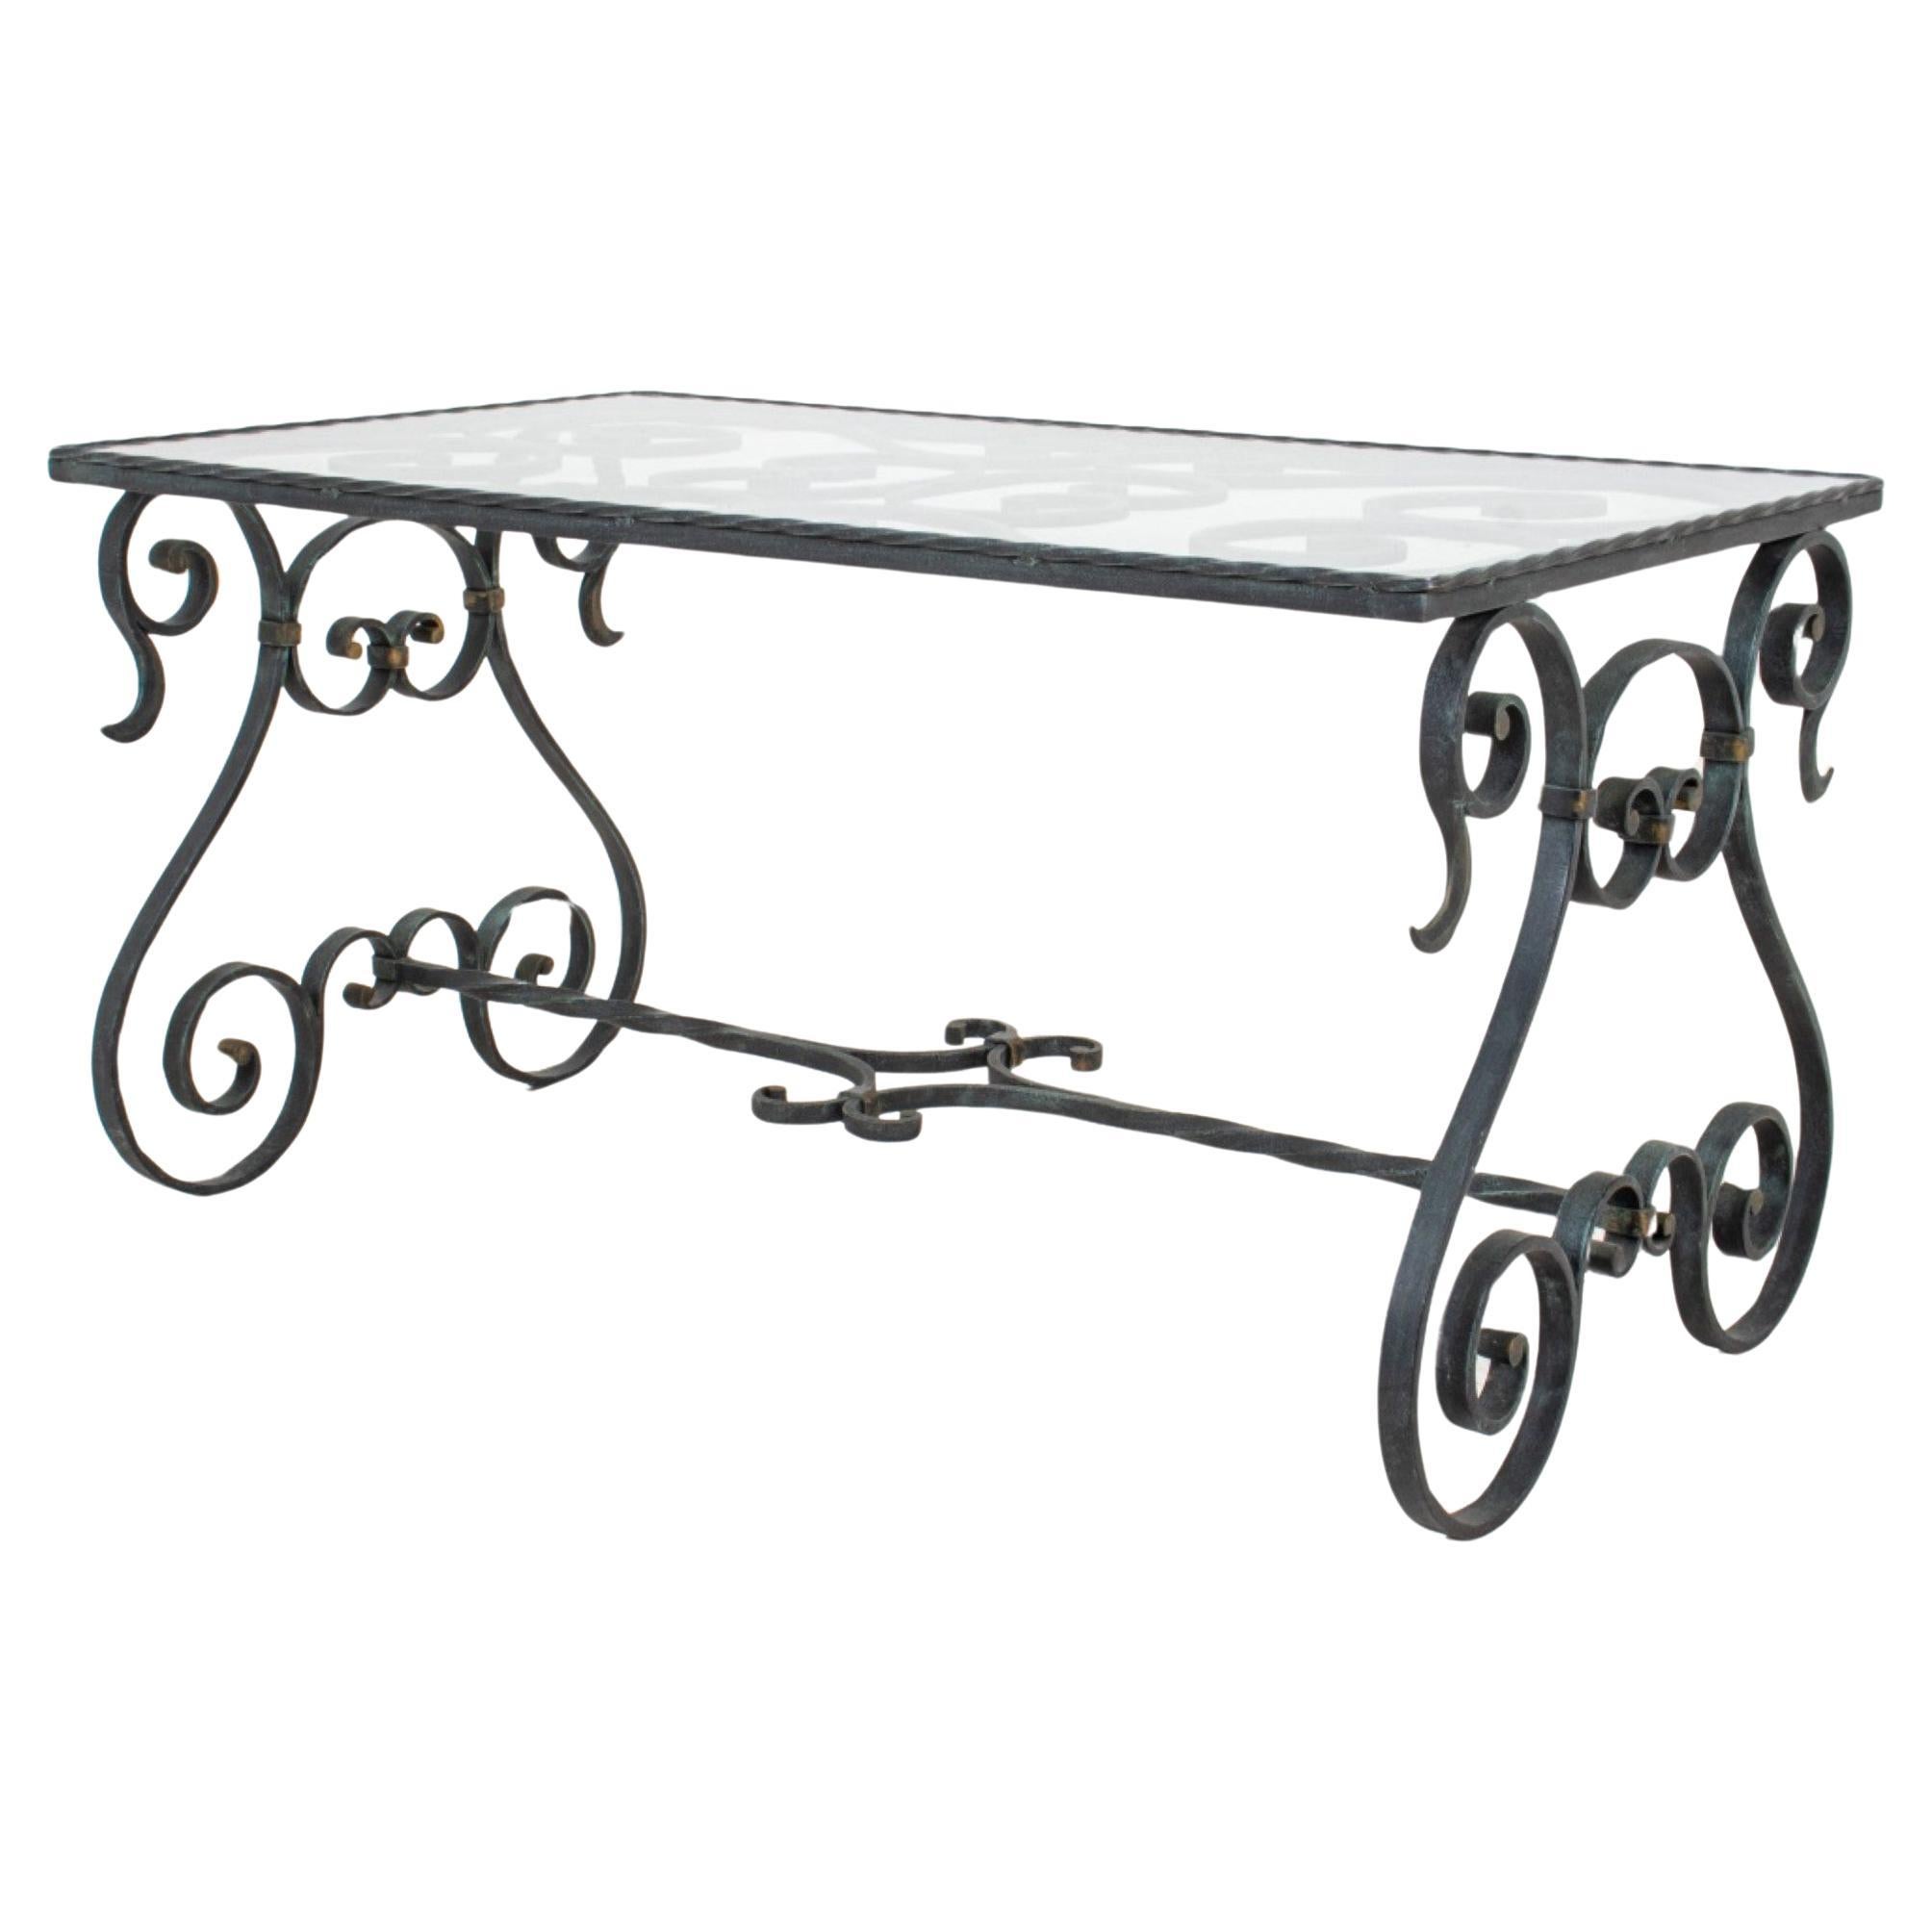 Wrought Iron Coffee Table With Glass Top For Sale